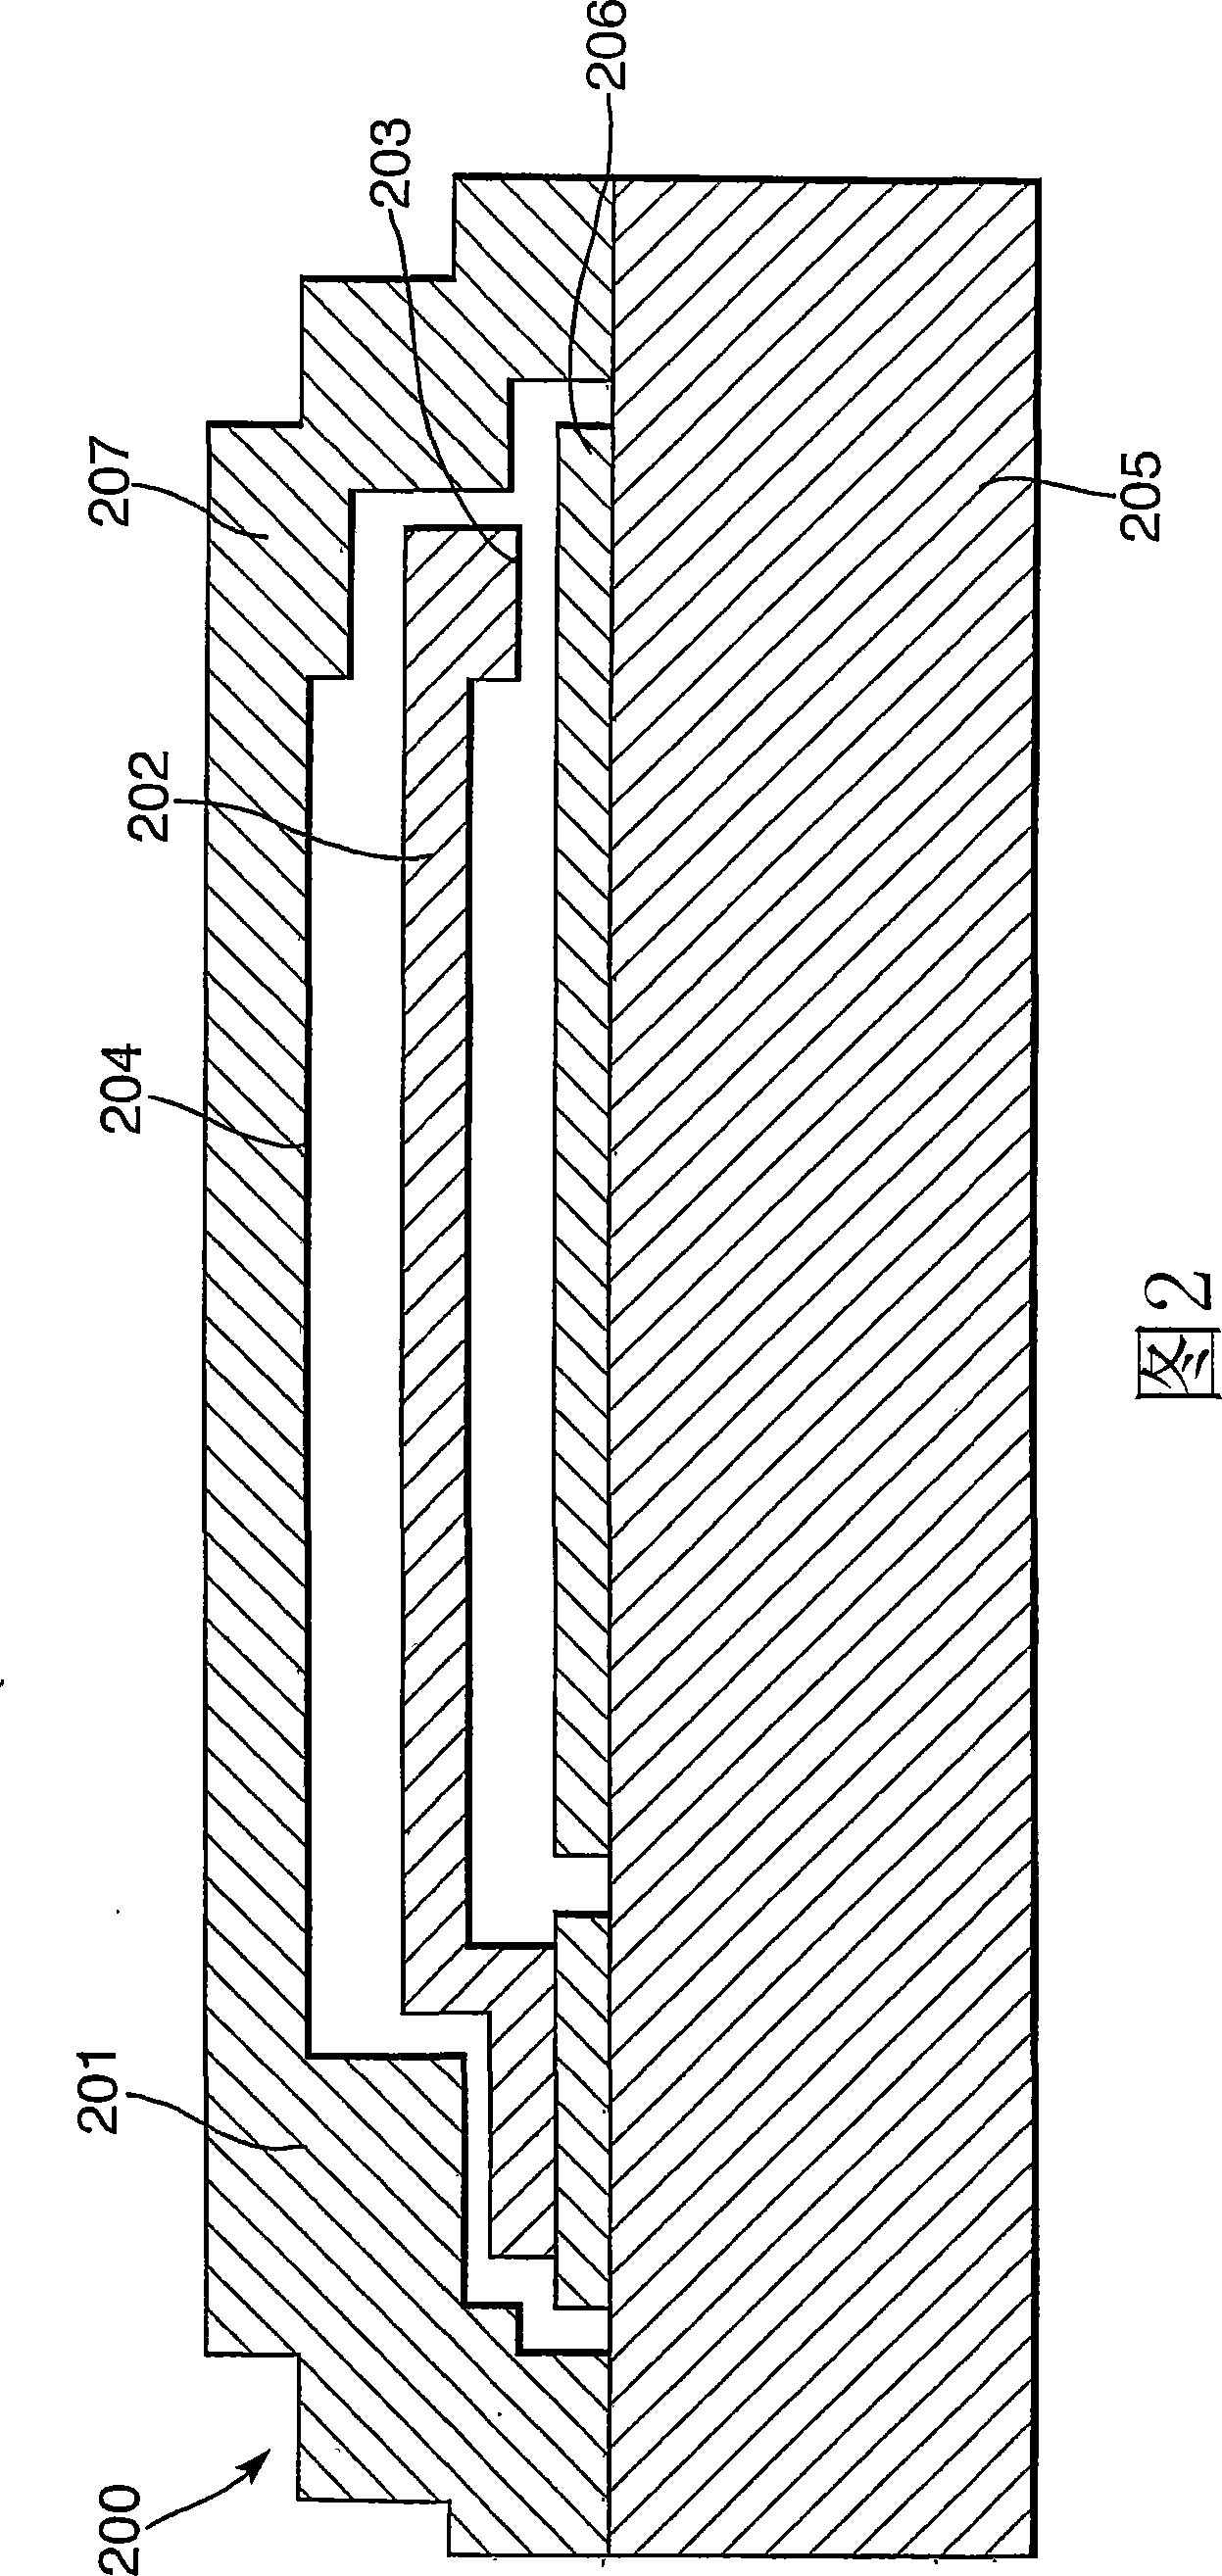 Method for manufacturing non-volatile microelectromechanical memory unit